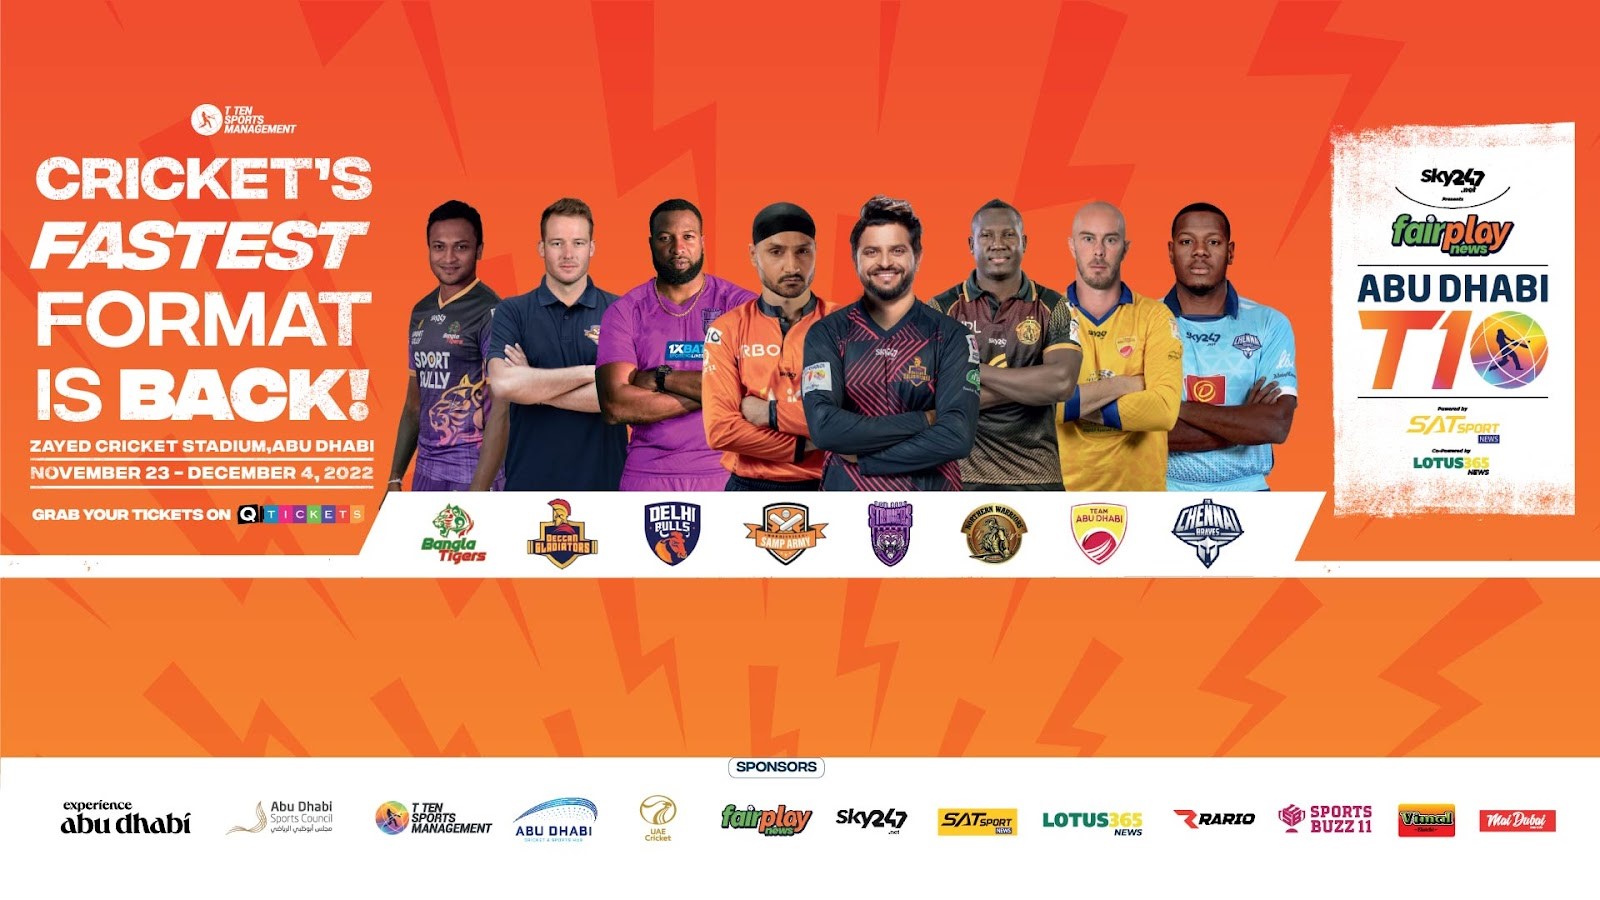 The Tickets To Fastest Format In Cricket – The Abu Dhabi T10 On Sale